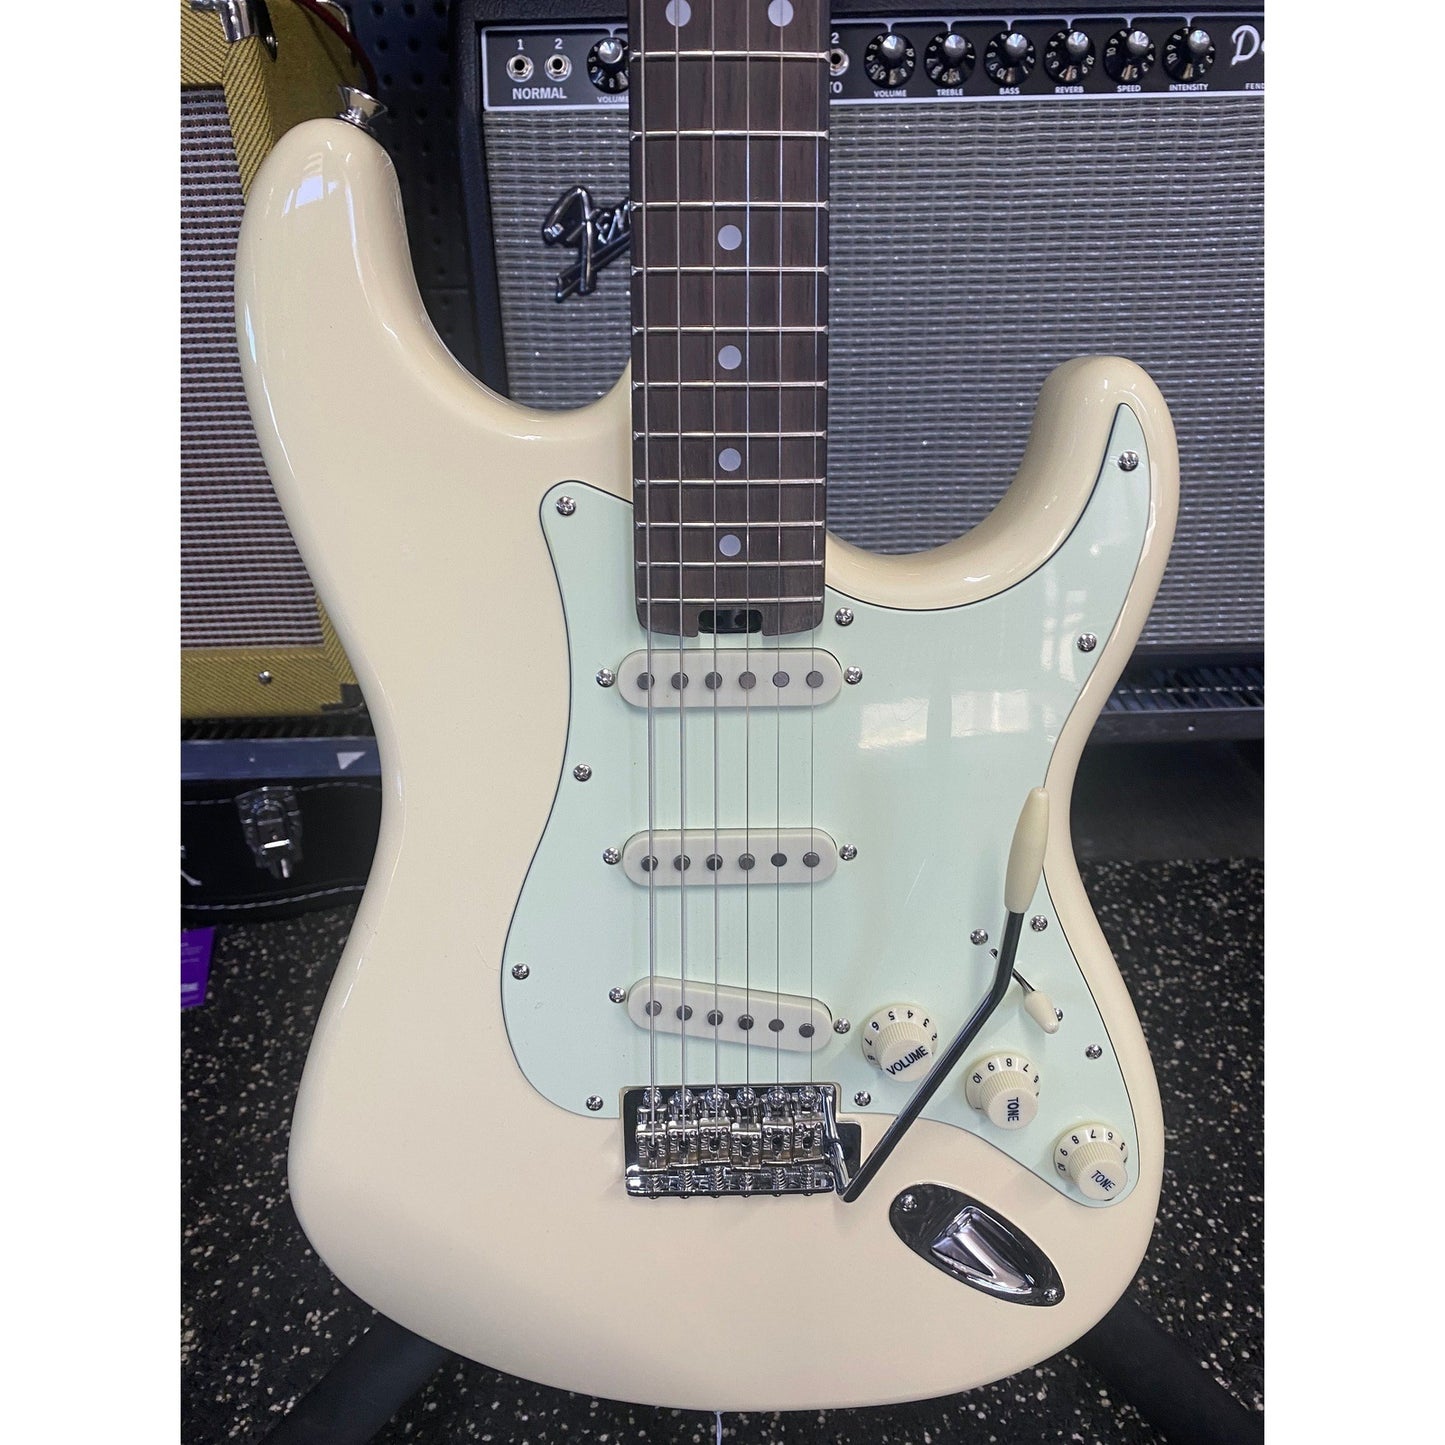 Aria STG-62 Modern Classics Series Electric Guitar in Vintage White with Mint Green Pickguard